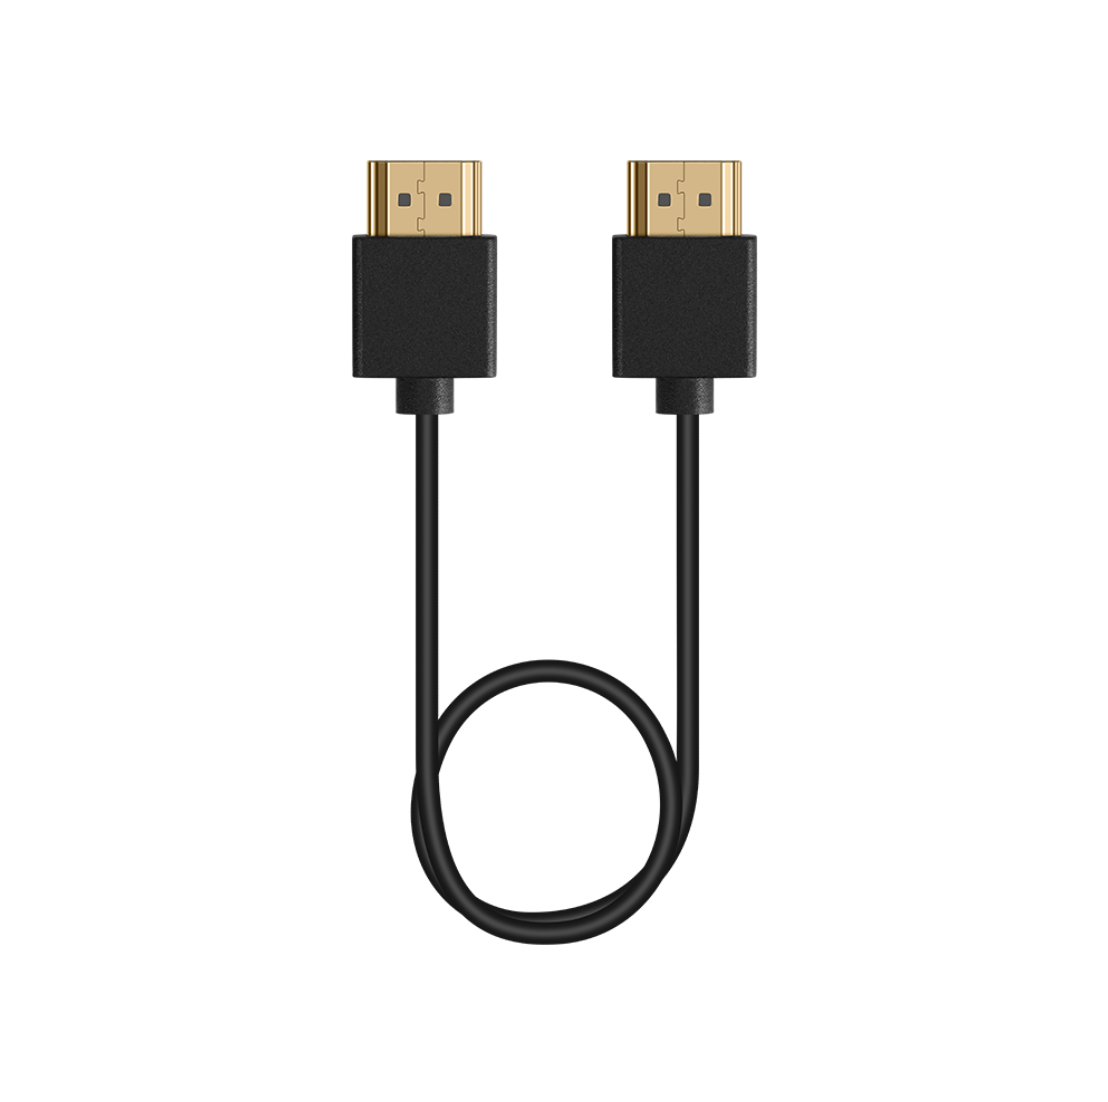 HL-HD03 HDMI Cable（A Male to A Male）